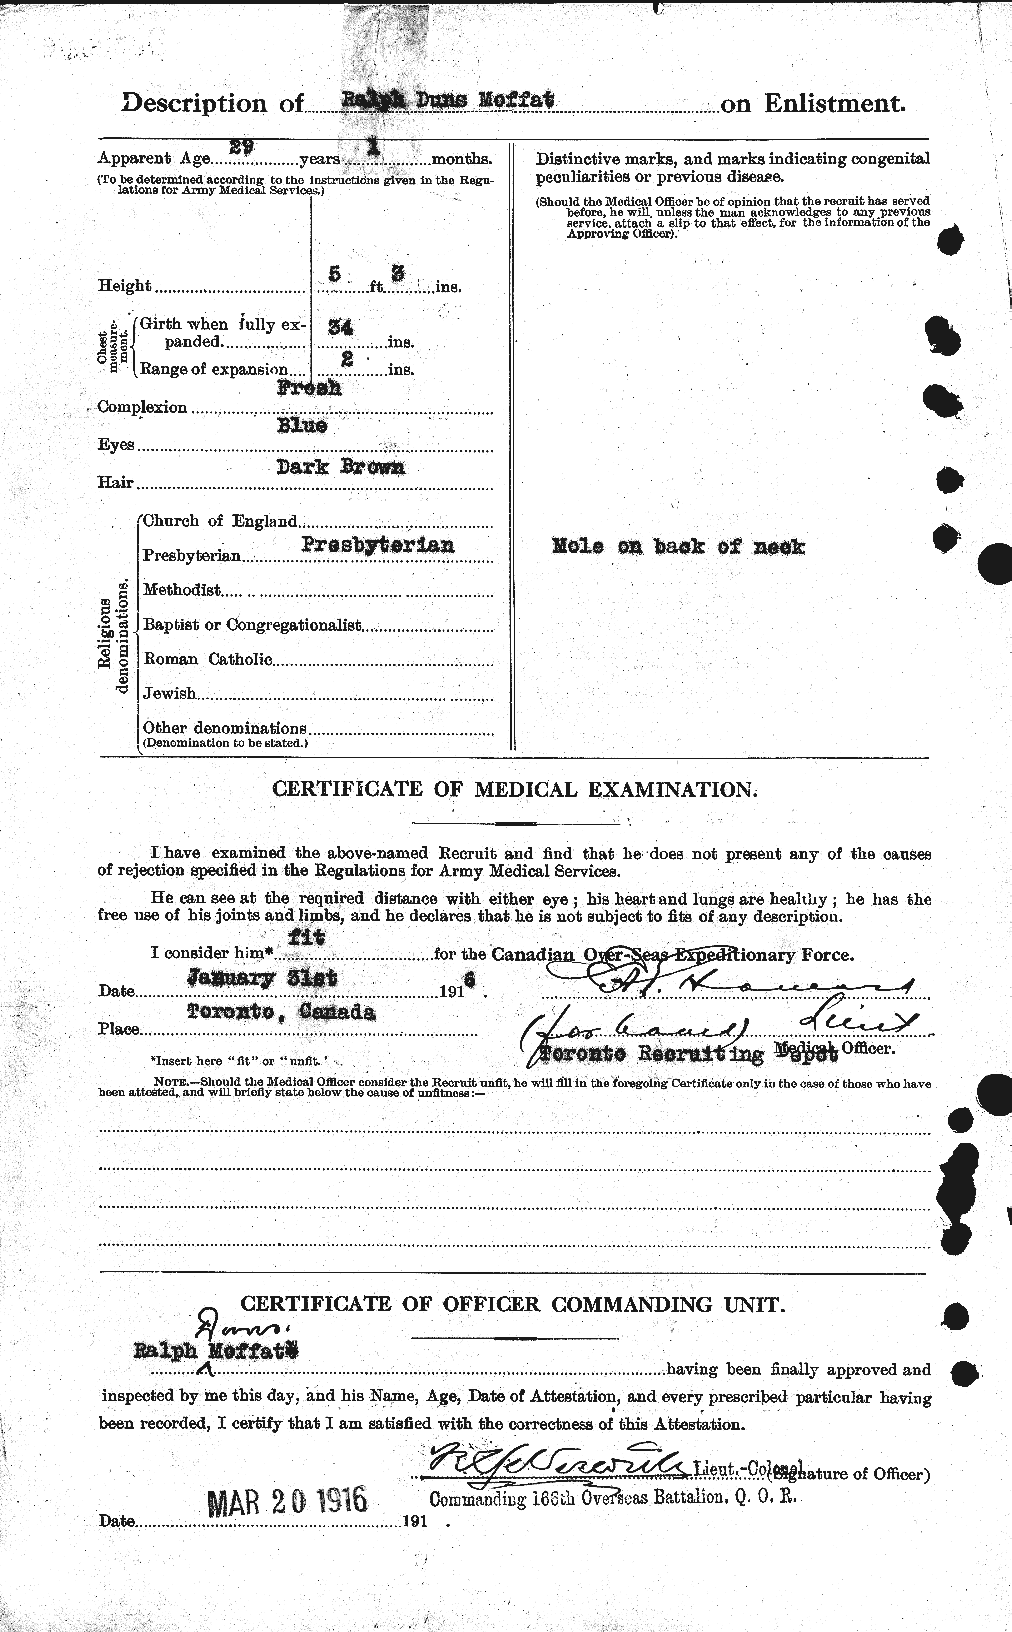 Personnel Records of the First World War - CEF 499058b